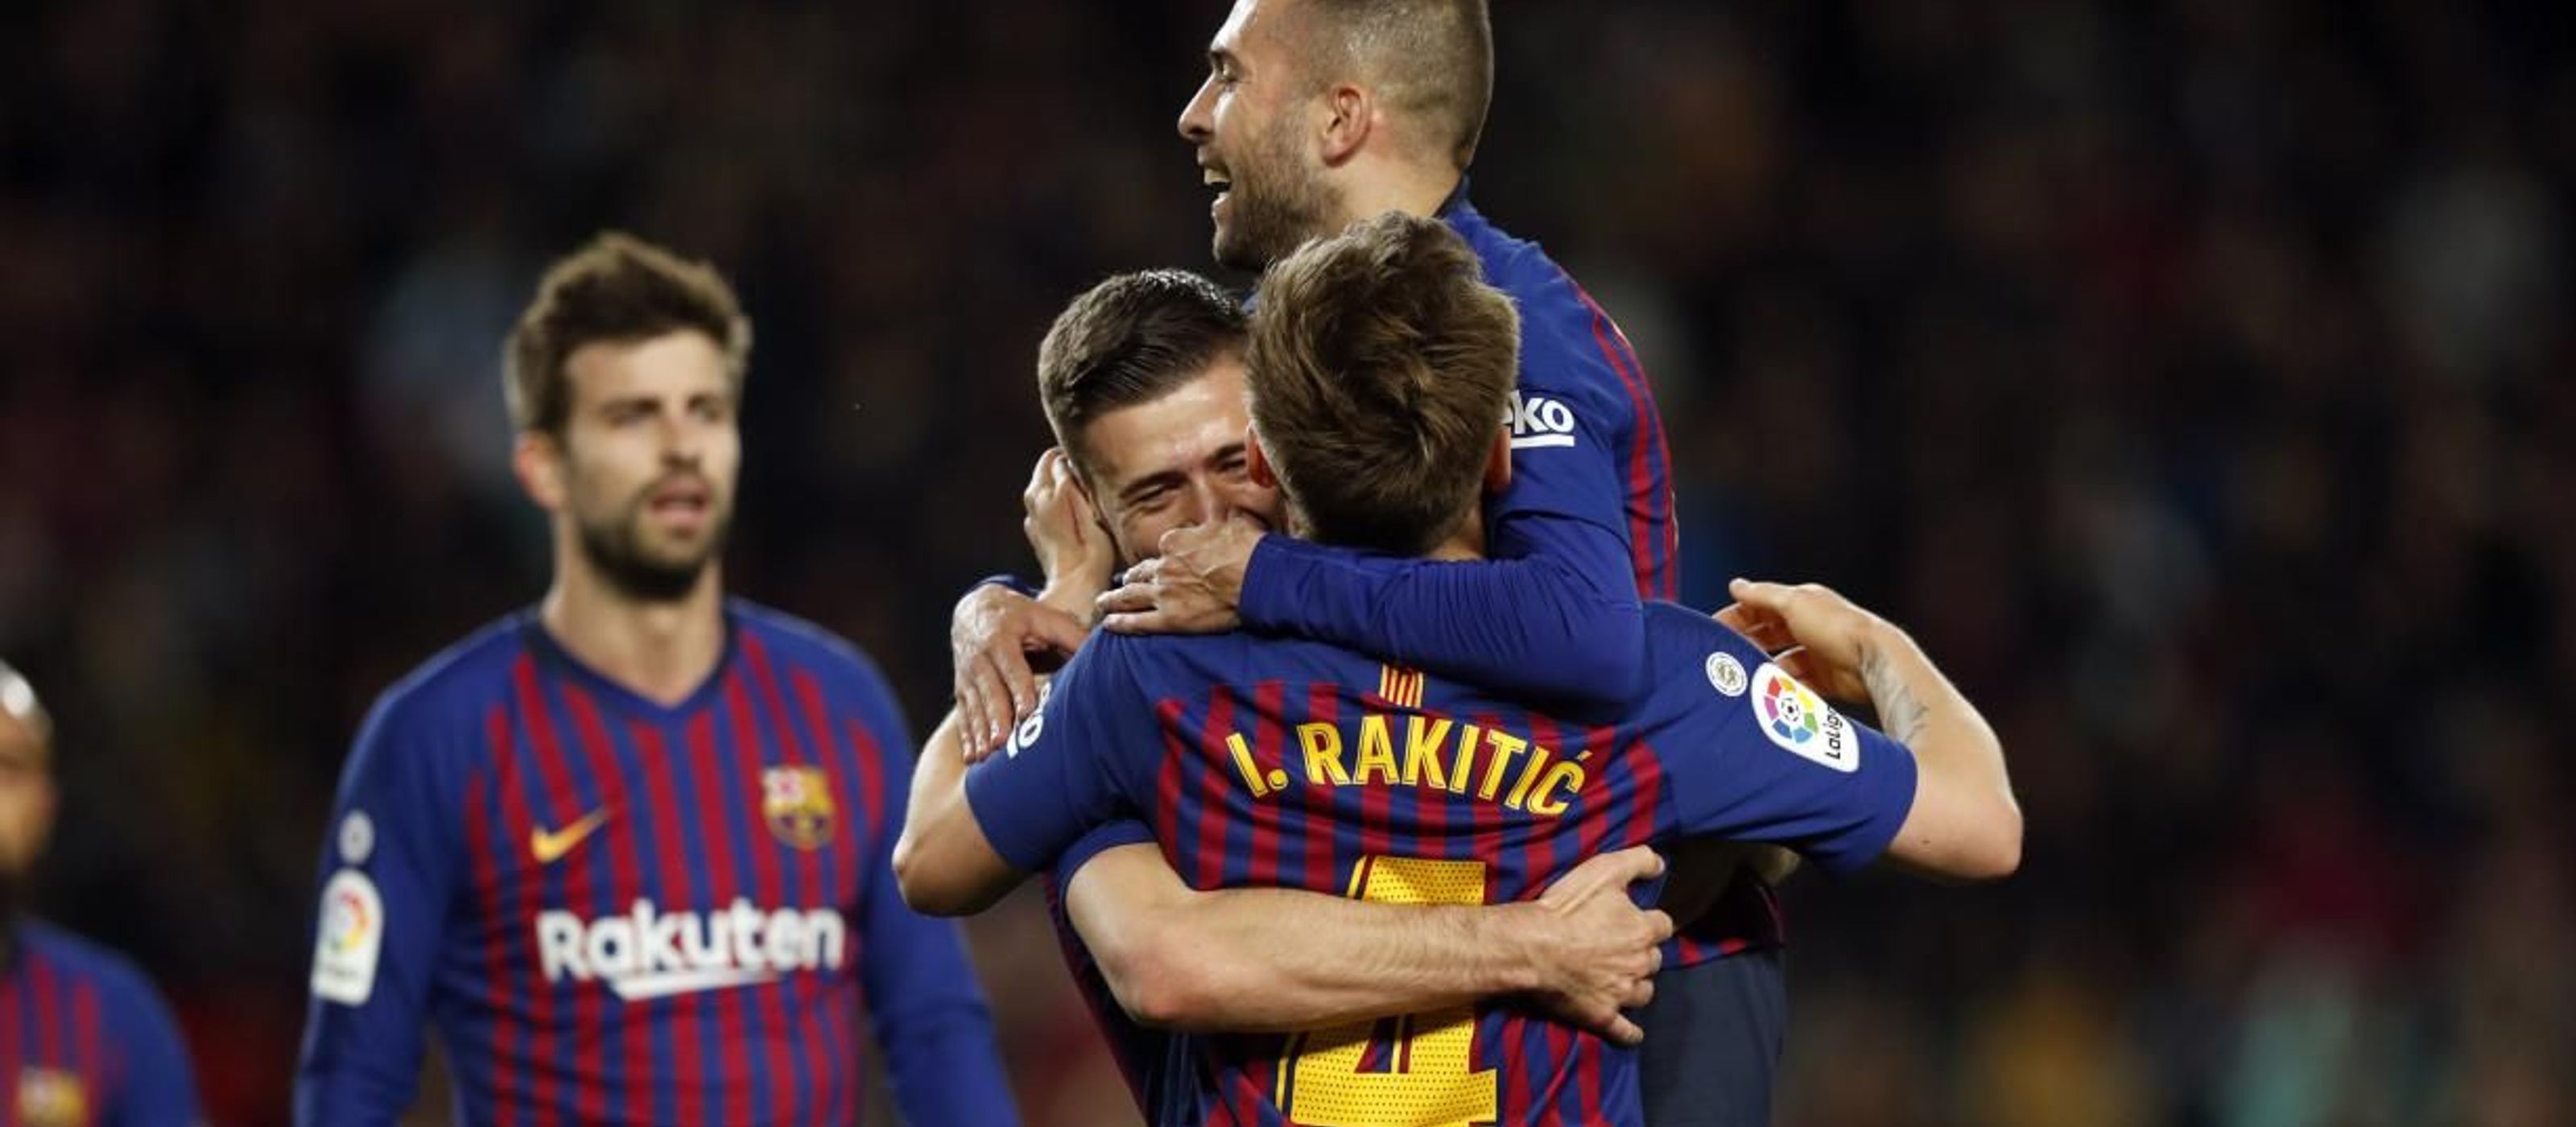 Jordi Alba, Ivan Rakitic, and Clement Lenglet celebrate together after one of the vital goals against Real Sociedad (Photo counrtest of FC Barcelona)